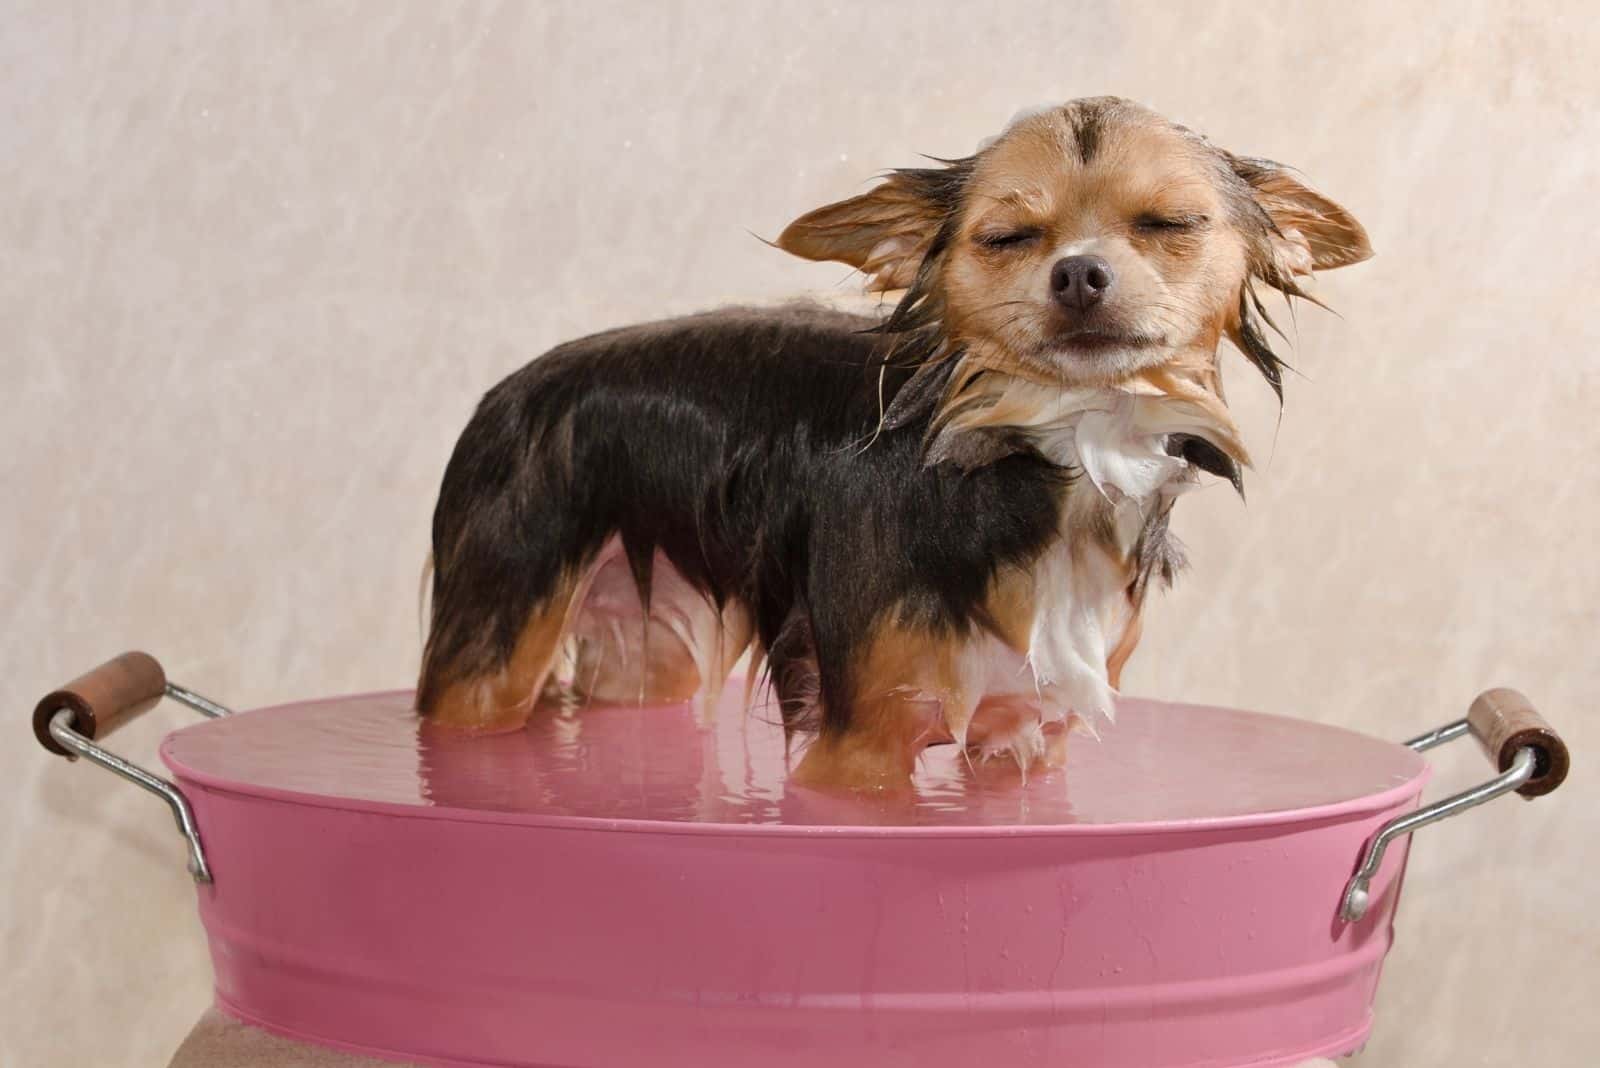 relaxed chihuahua puppy taking a bath in a pink tub